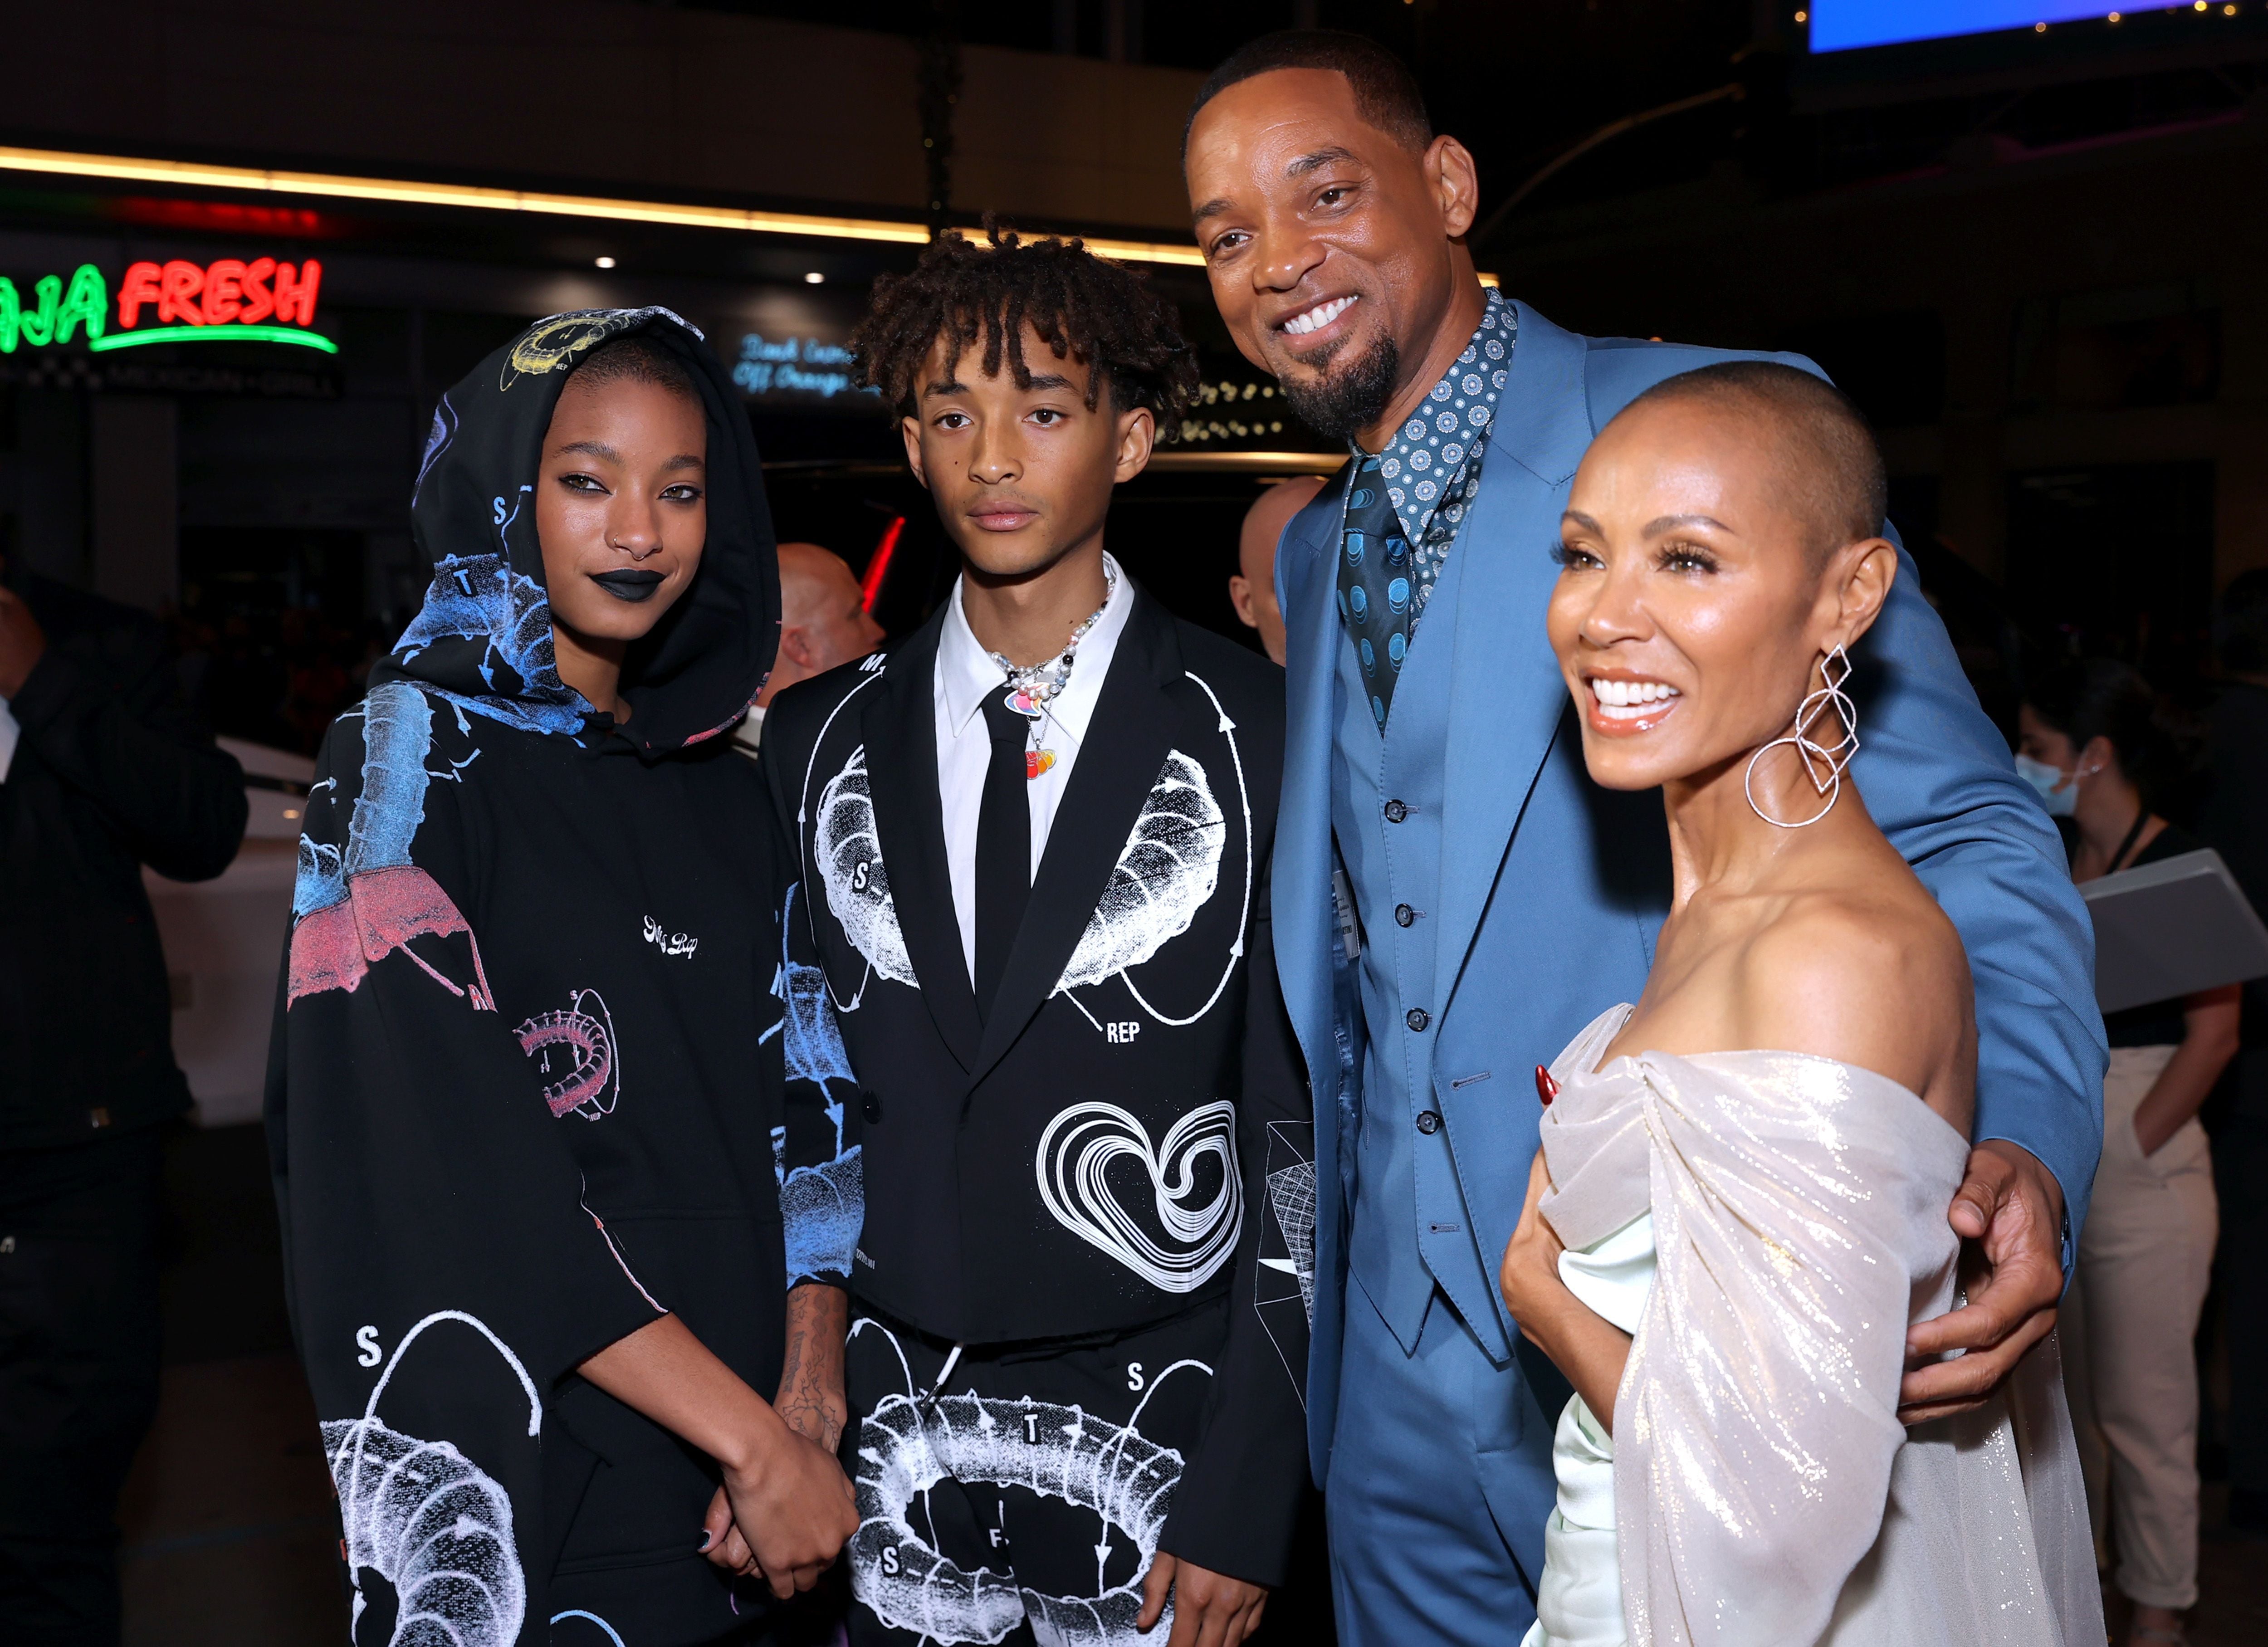 What Are Willow Smith and Jaden Smith's Zodiac Signs?